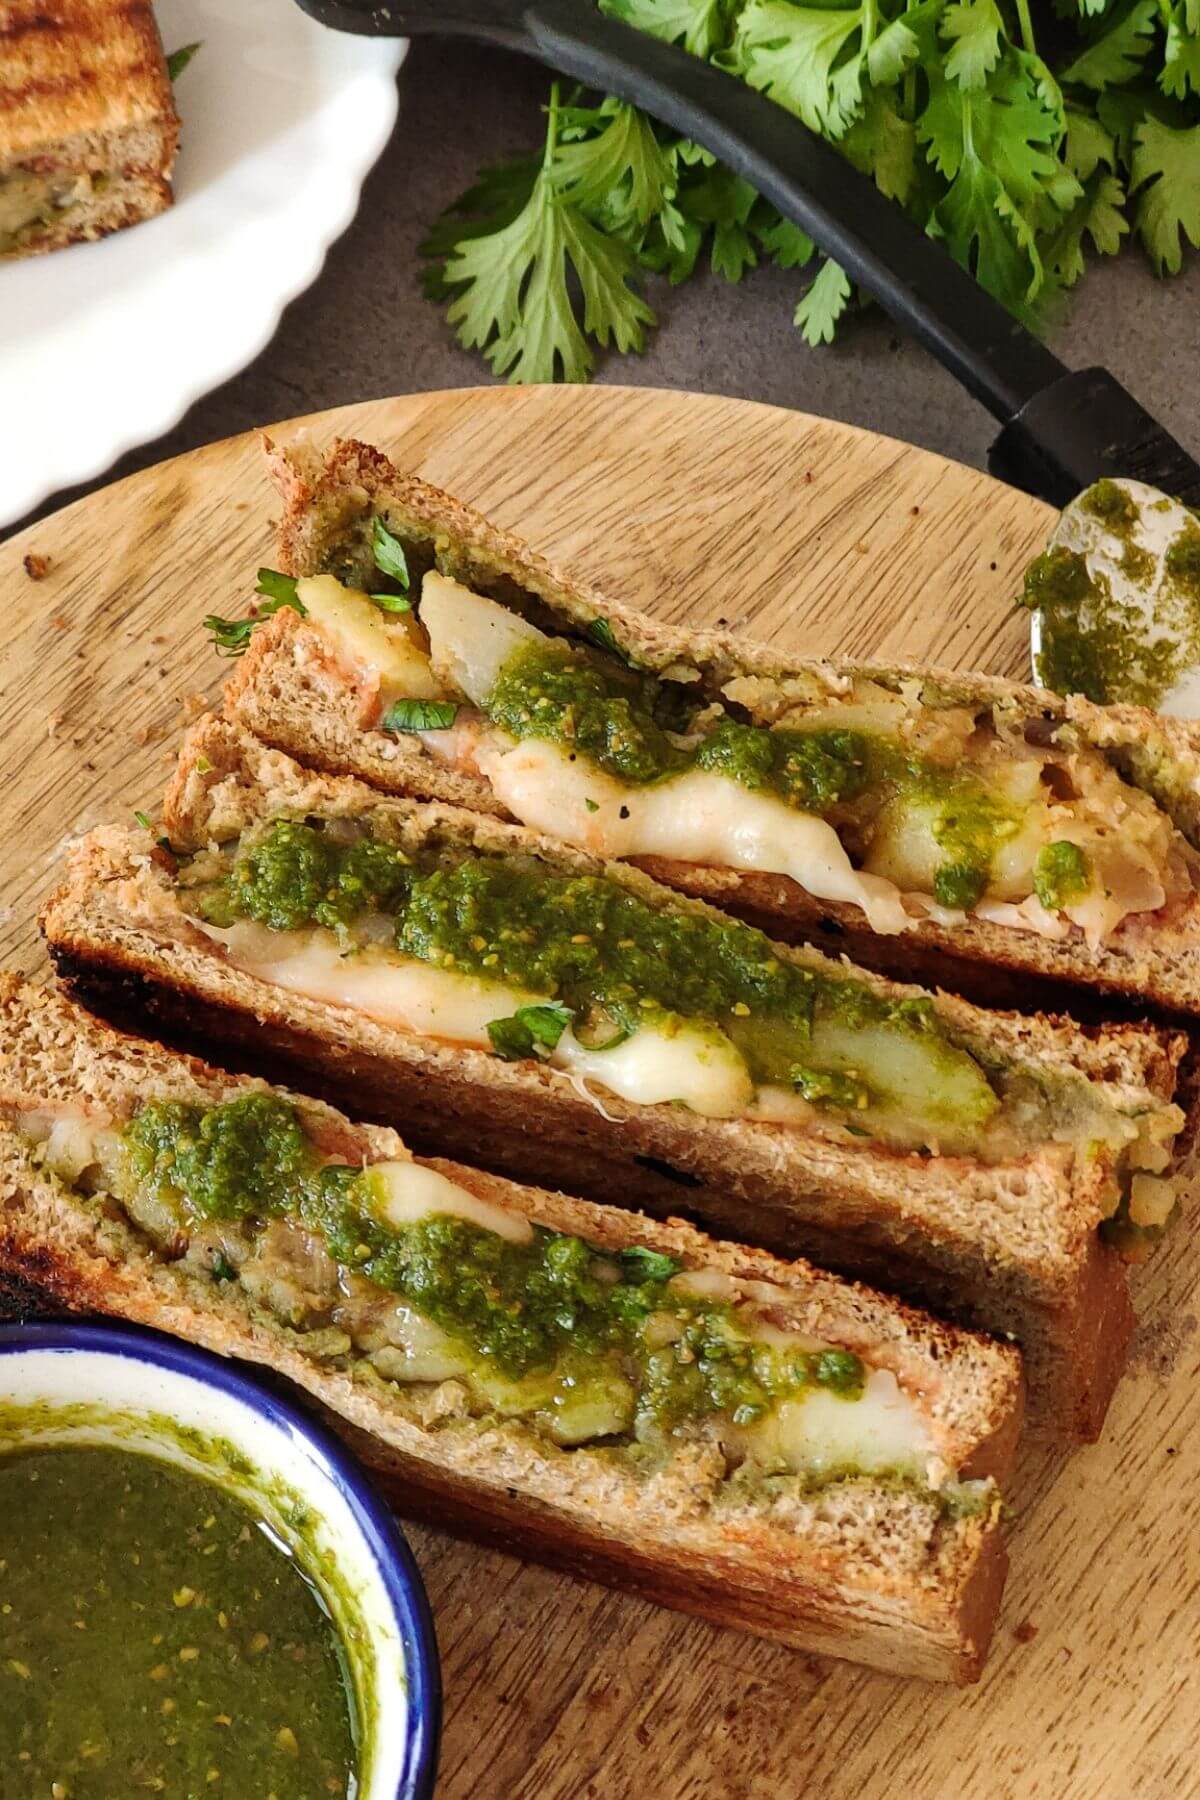 Potato sandwiches with green chutney on a wooden board.